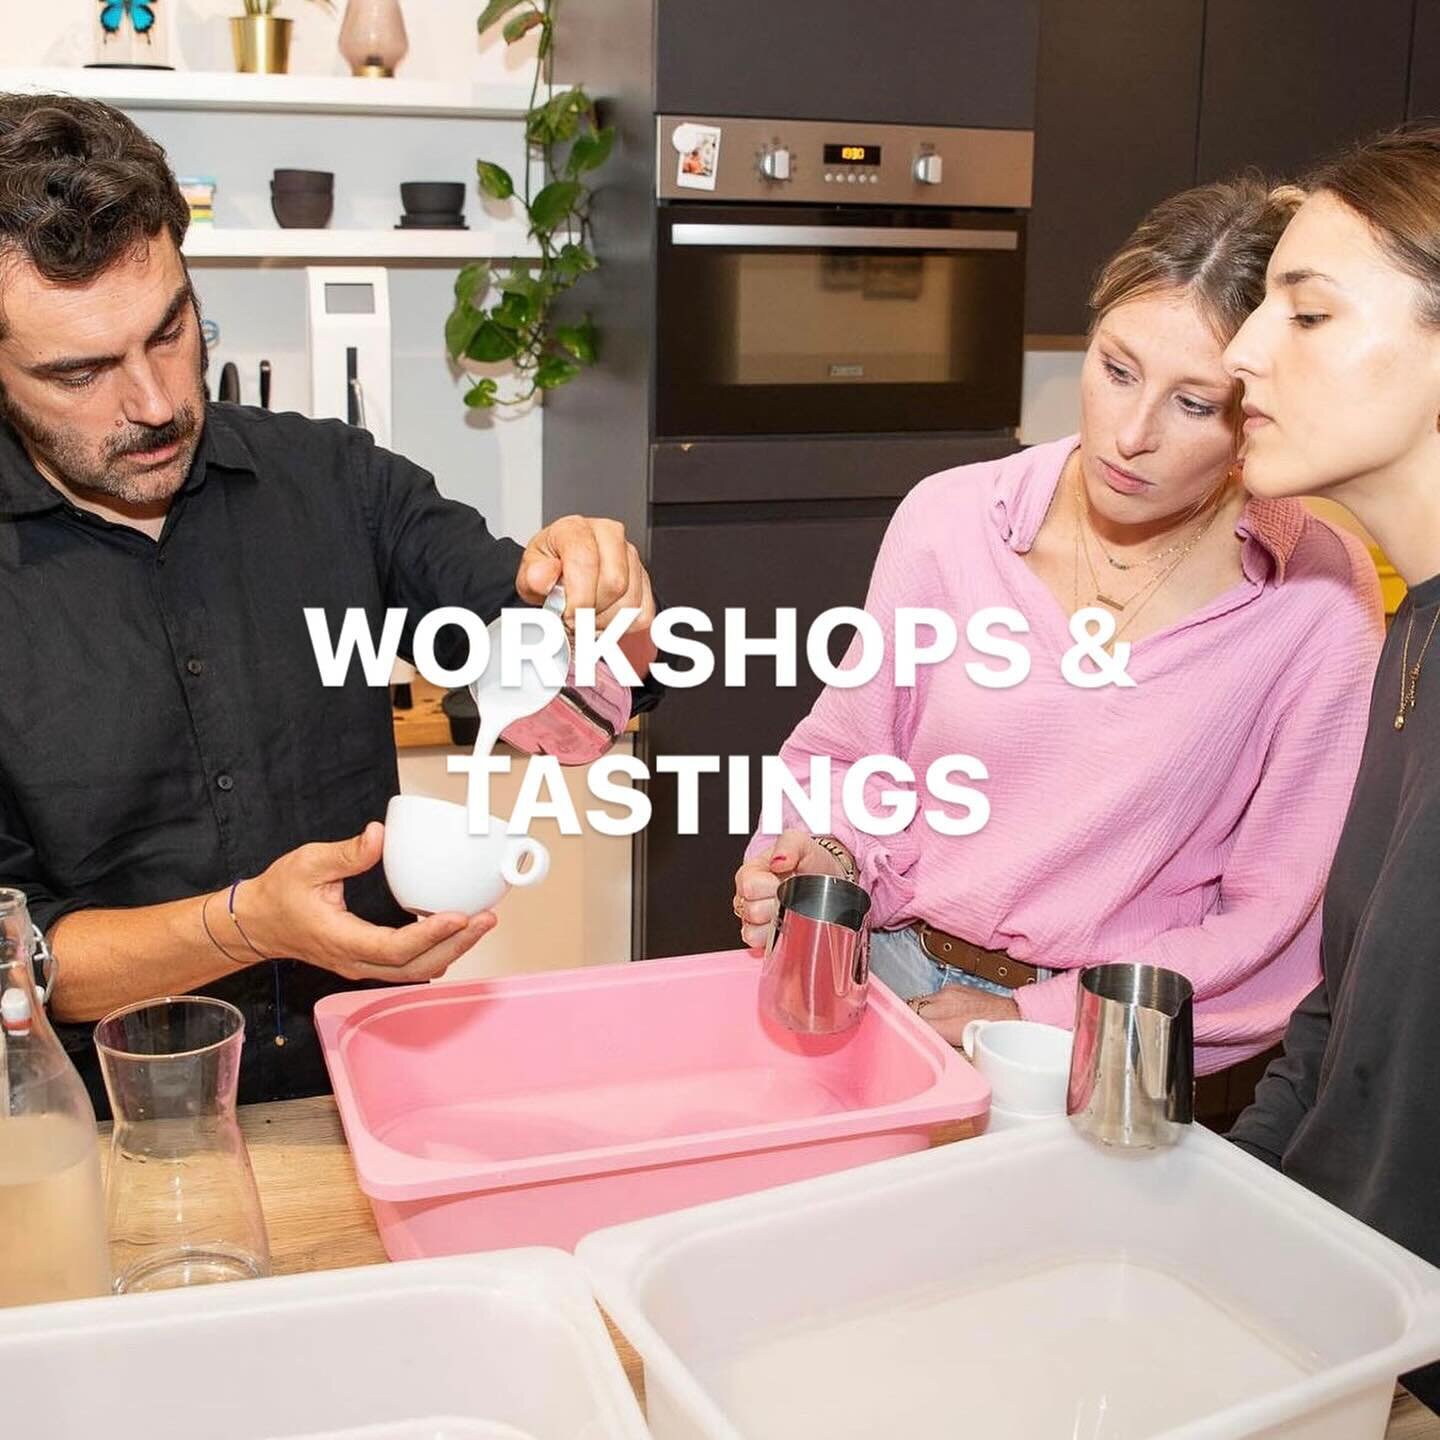 FOR ALL INFO ABOUT EVENTS GO TO ORGANIZER&rsquo;S INSTAGRAM 

Workshops &amp; tastings
Cuprima Coffee Tasting &amp; talk about processing coffee @cuprima 
Smiling Barista Latte Art Workshop @smilingbarista